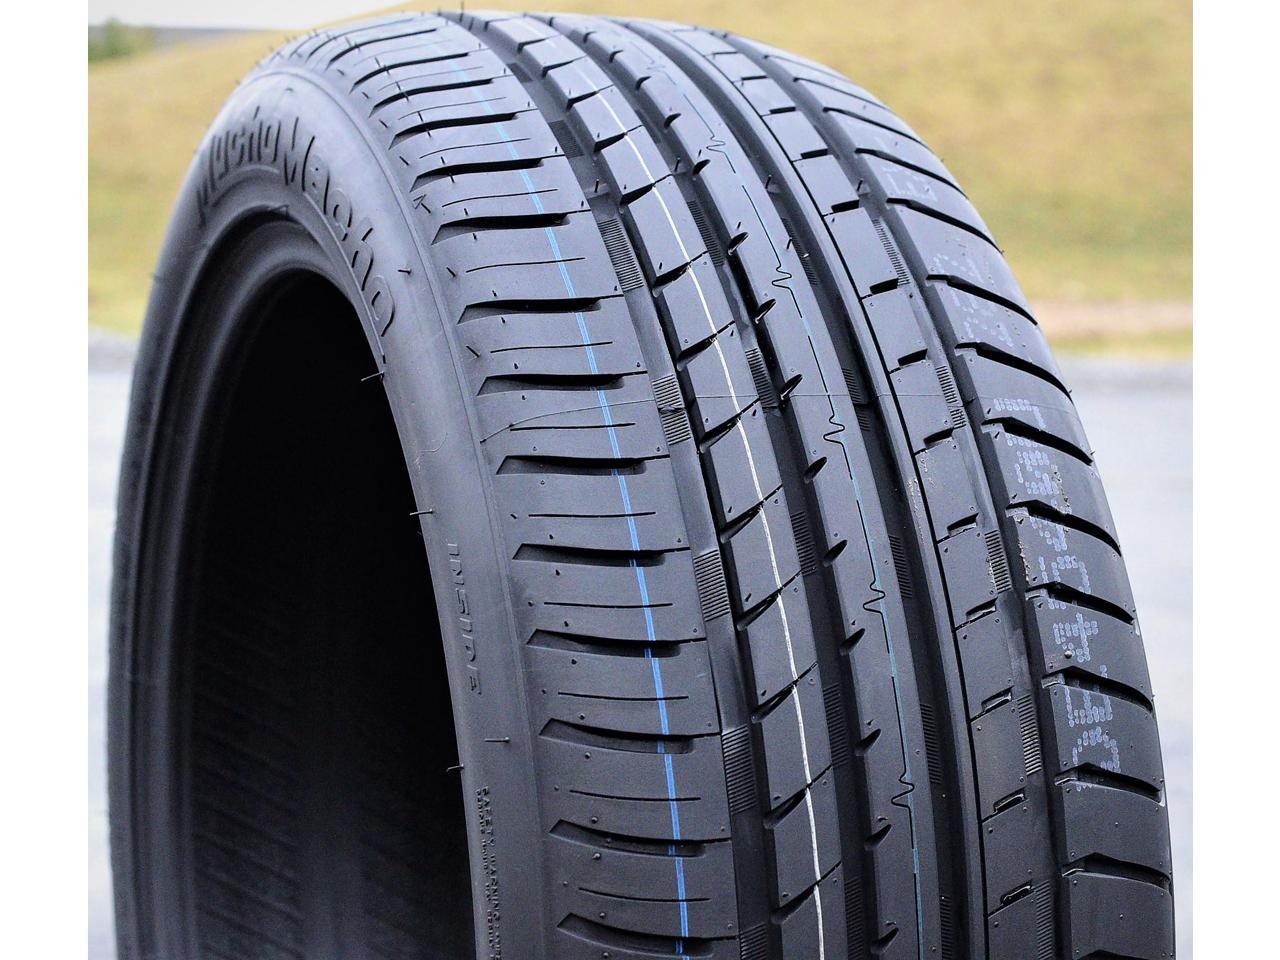 Tire Cosmo TigerTail 275/40ZR20 106Y XL A/S High Performance